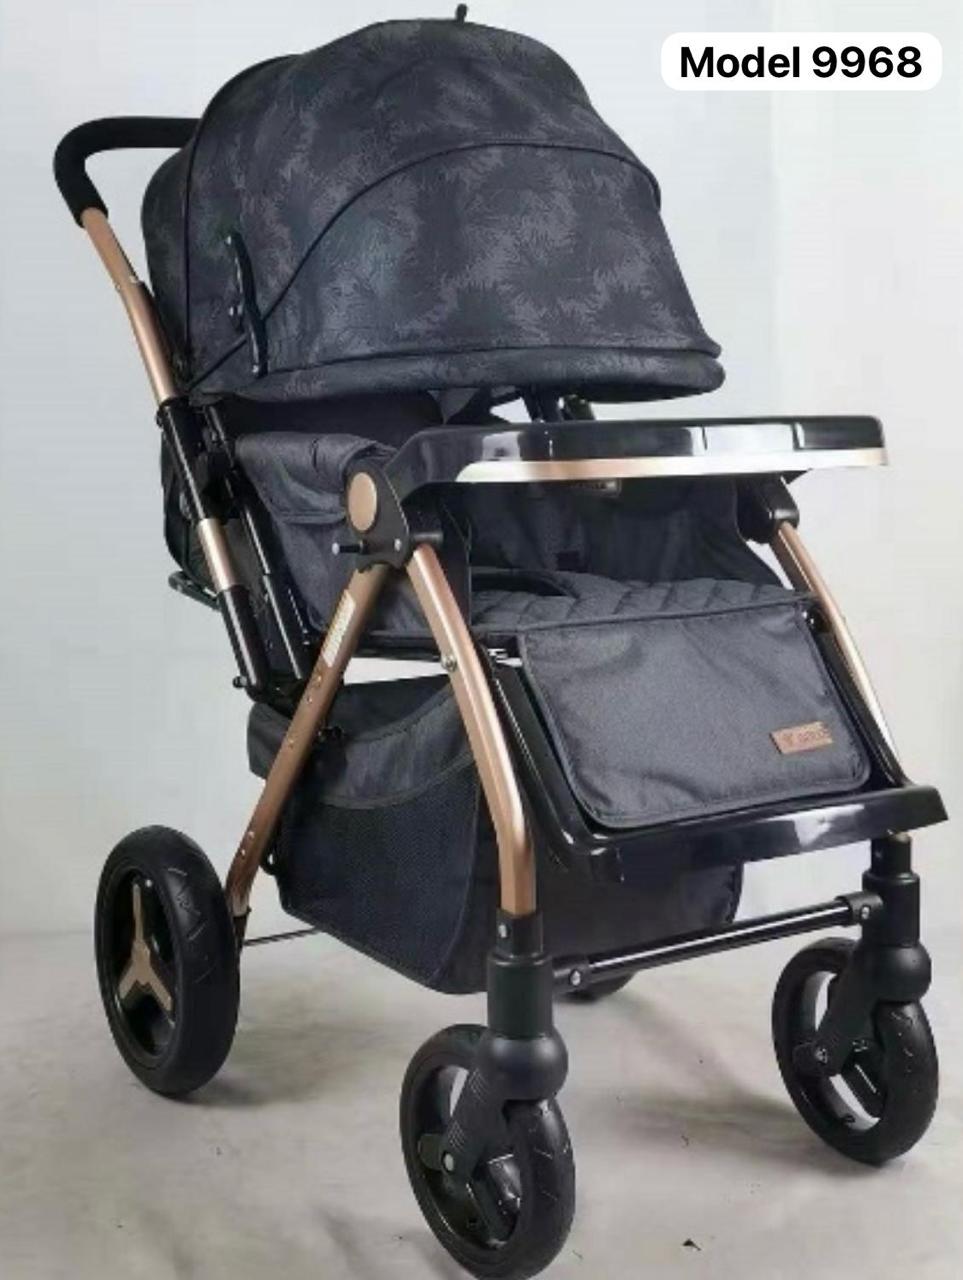 Unveiling the 3-in-1 Portable Travel System Baby Stroller Pushchair - A Foldable Luxury High Landscape Baby Pram